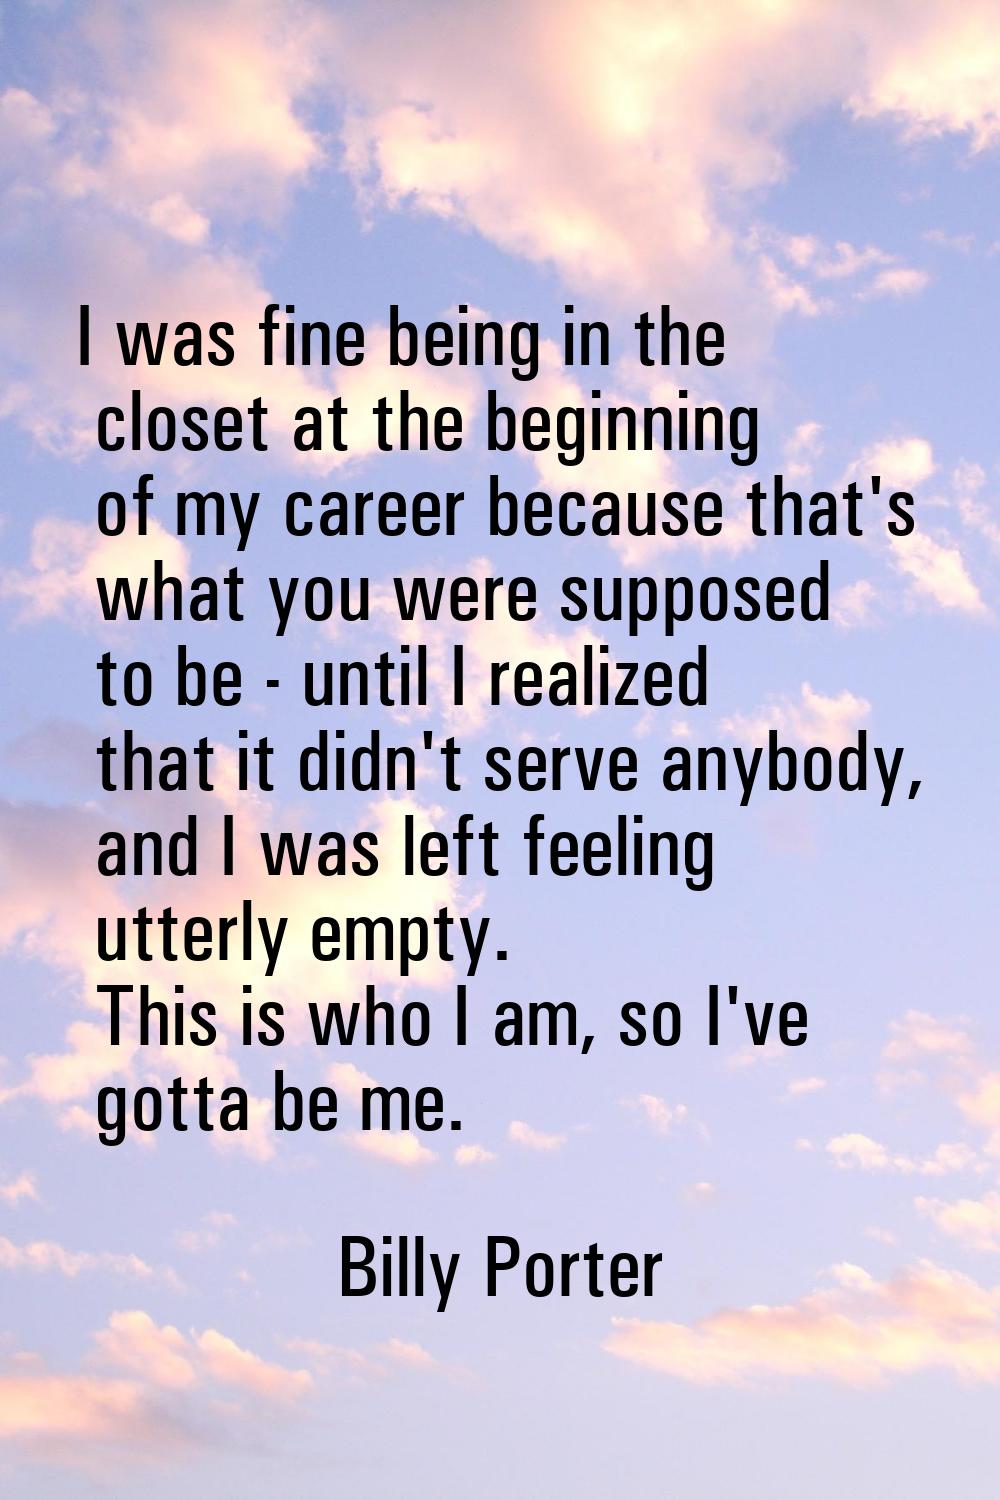 I was fine being in the closet at the beginning of my career because that's what you were supposed 